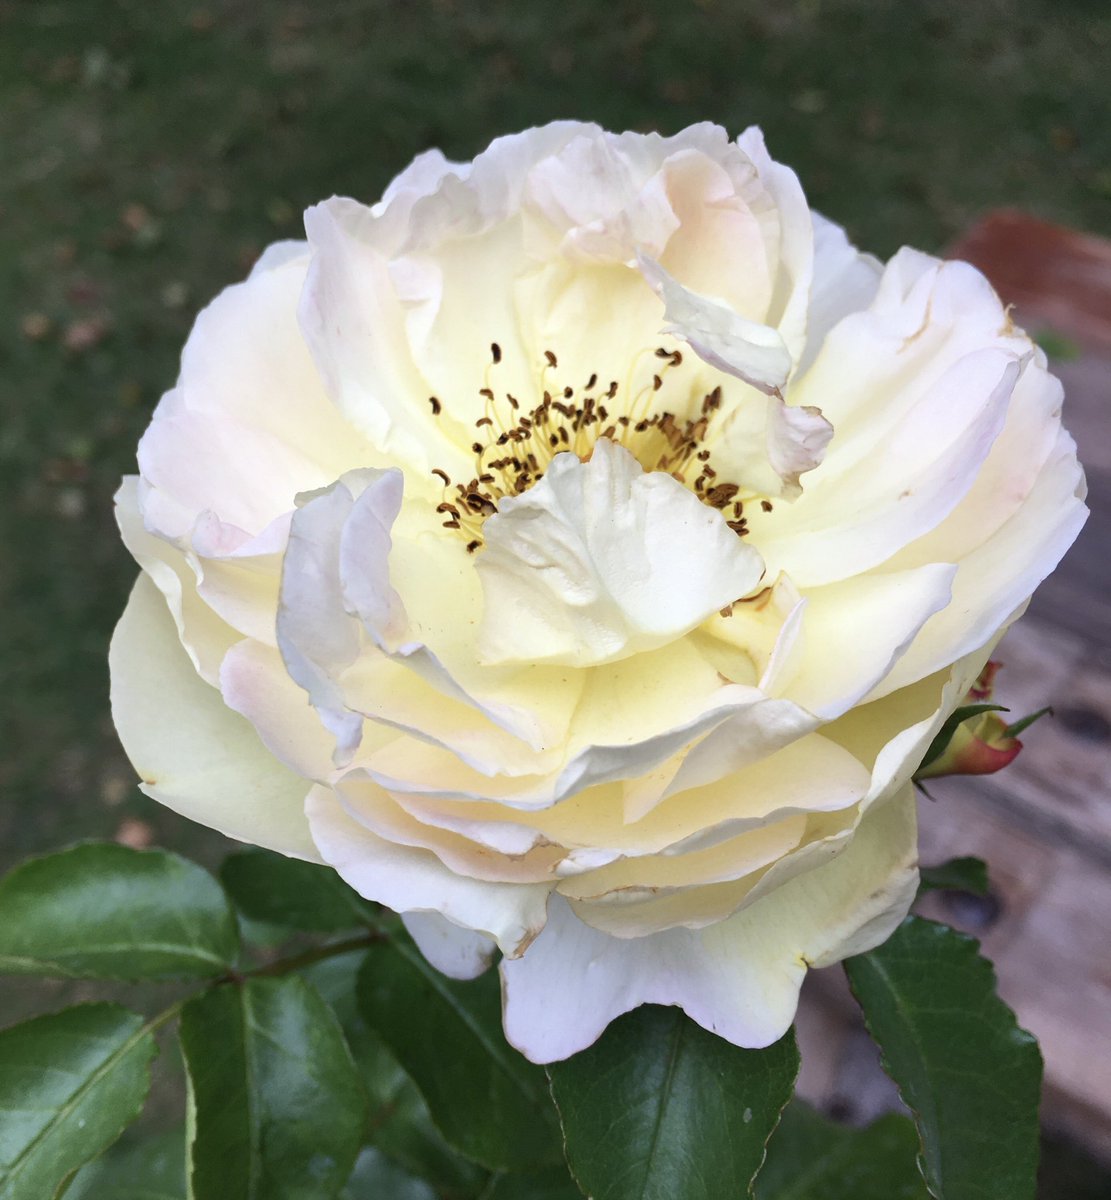 Such a beautiful rose. Plenty of pollen. Old-fashioned scent. Modern disease-resistant breeding.Belle de Jour.Thank you ⁦@rosesukroses⁩ ⁦@ApuldramRoses⁩ for the most gorgeous rose. I’ll treasure it. #RoseOfTheYear #gardening #flower #thursdayvibes #ThursdayMotivation